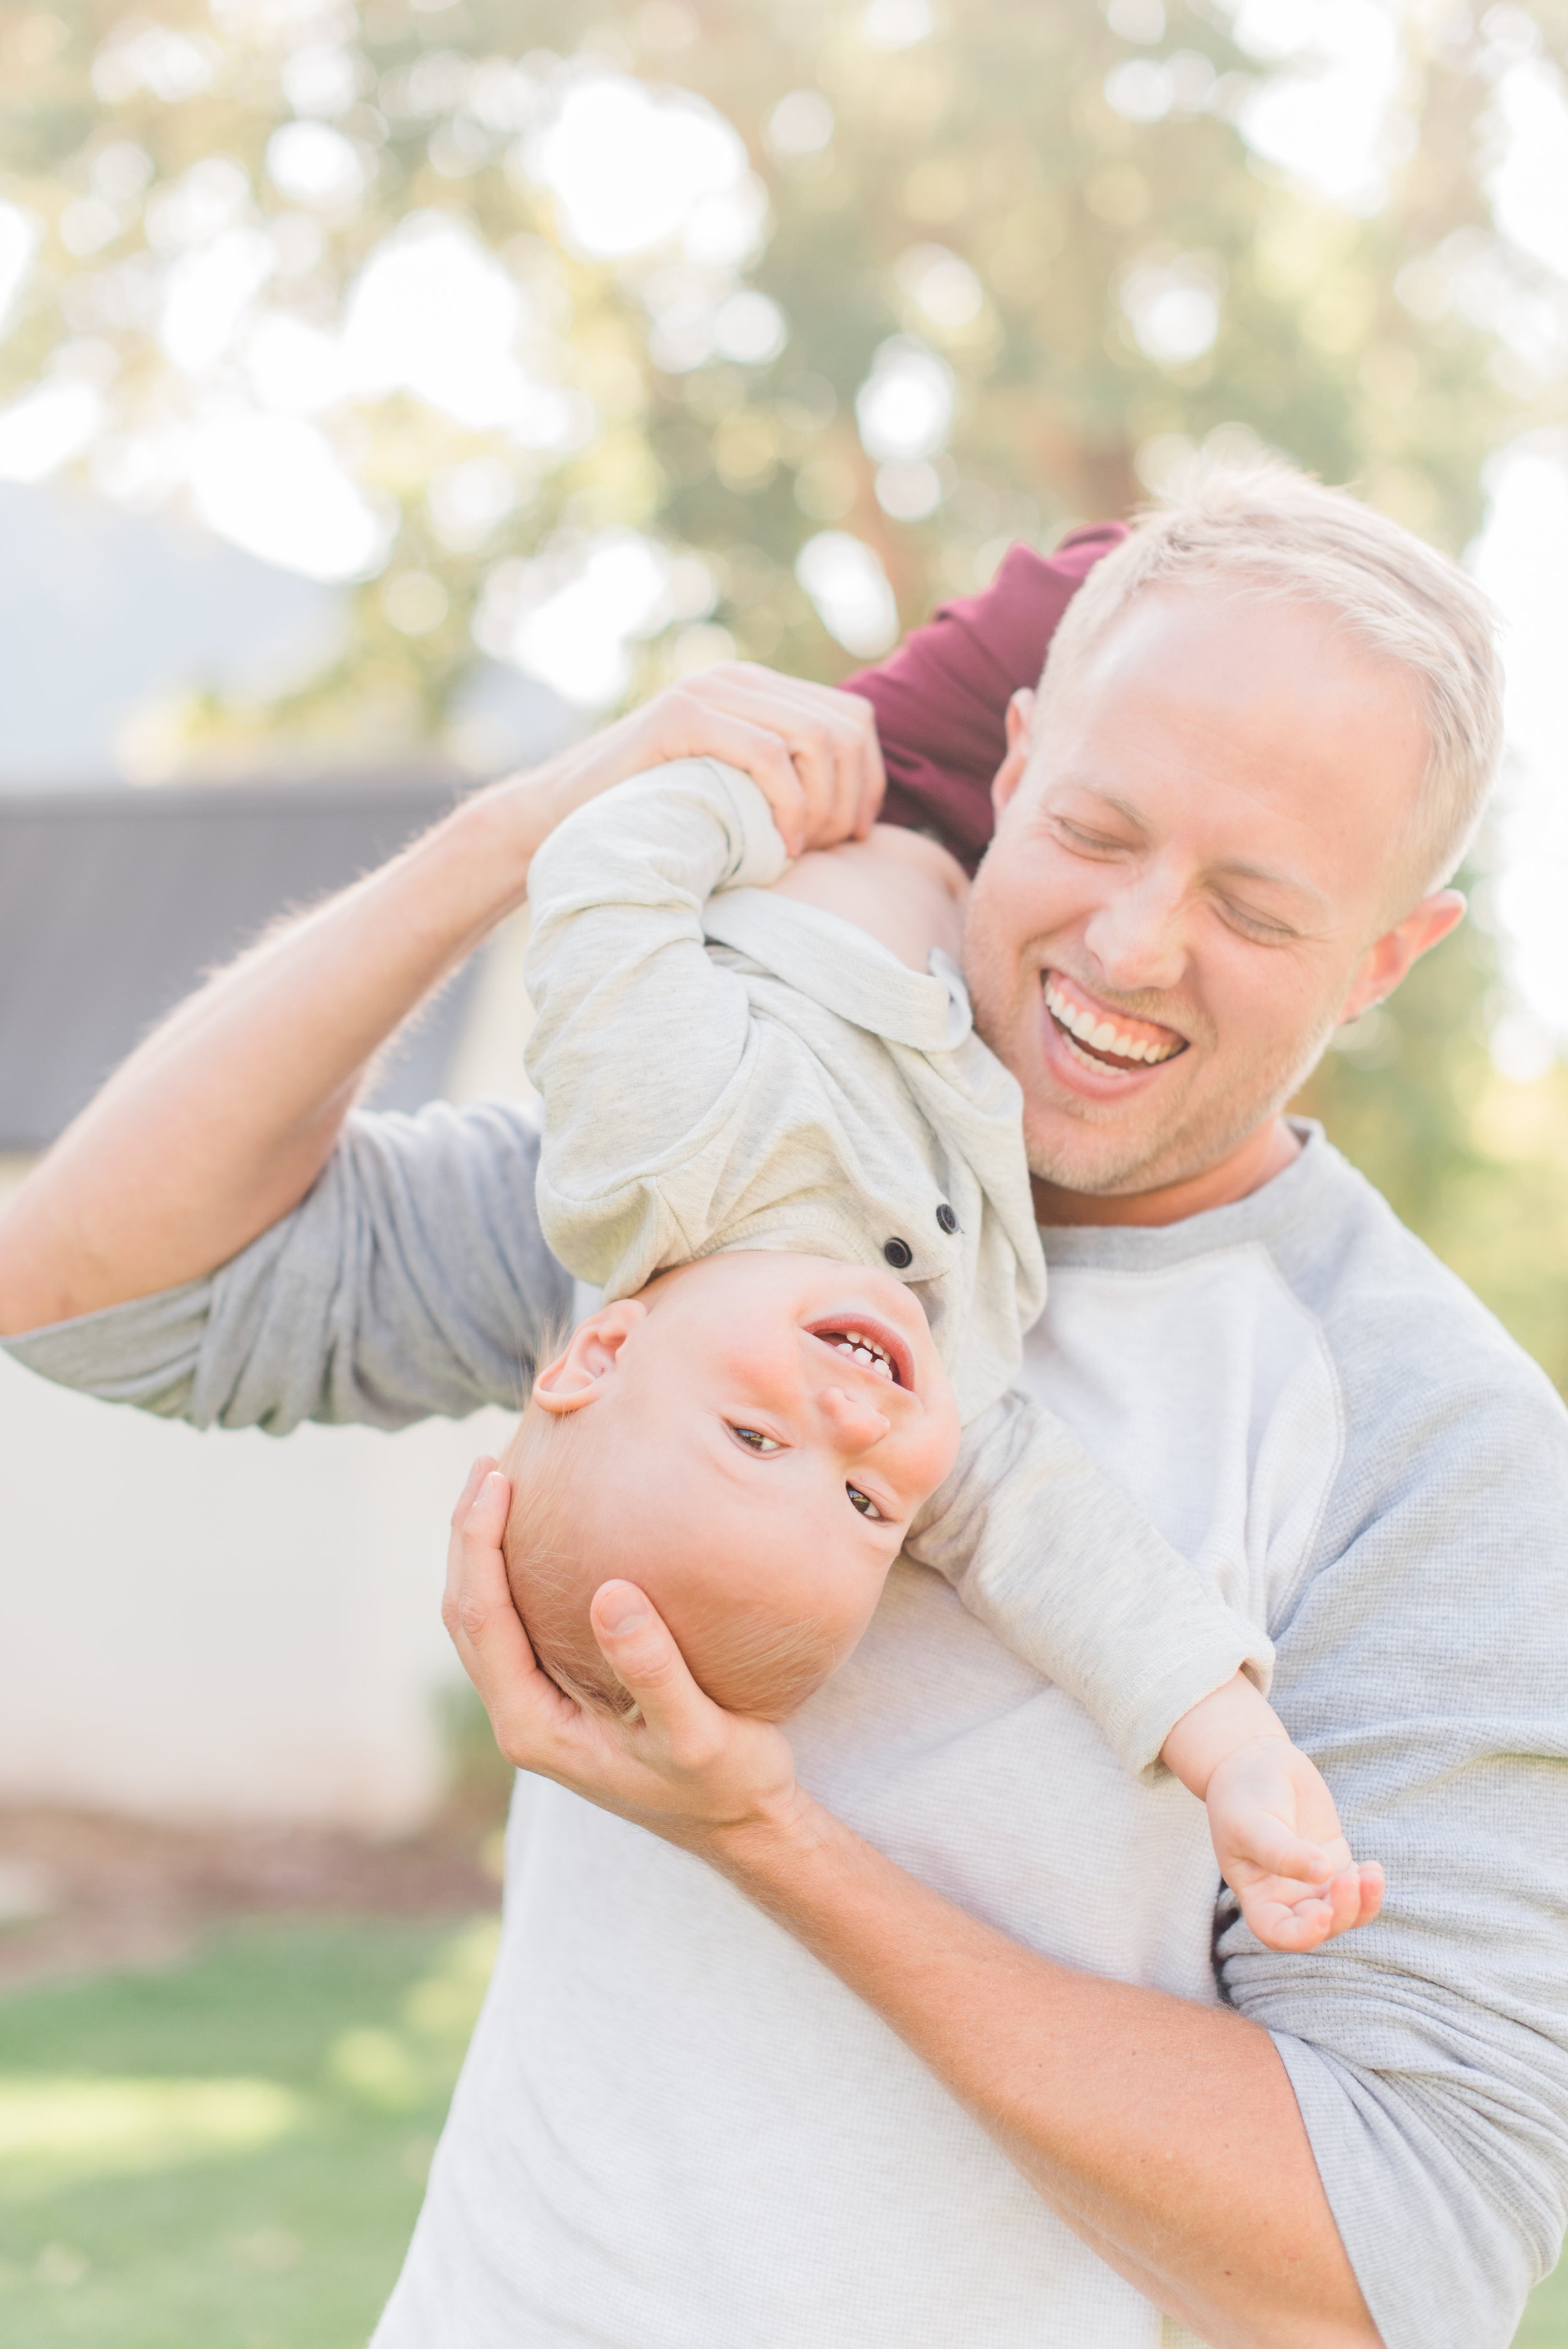  A dad and his son are captured mid-laugh by photographer Jacquie Erickson on a beautiful summer day. Happy family father-son summertime candid shot pure joy #candidkidsphoto #daddysboy #midlaugh #summertime #georgiaphotographer 